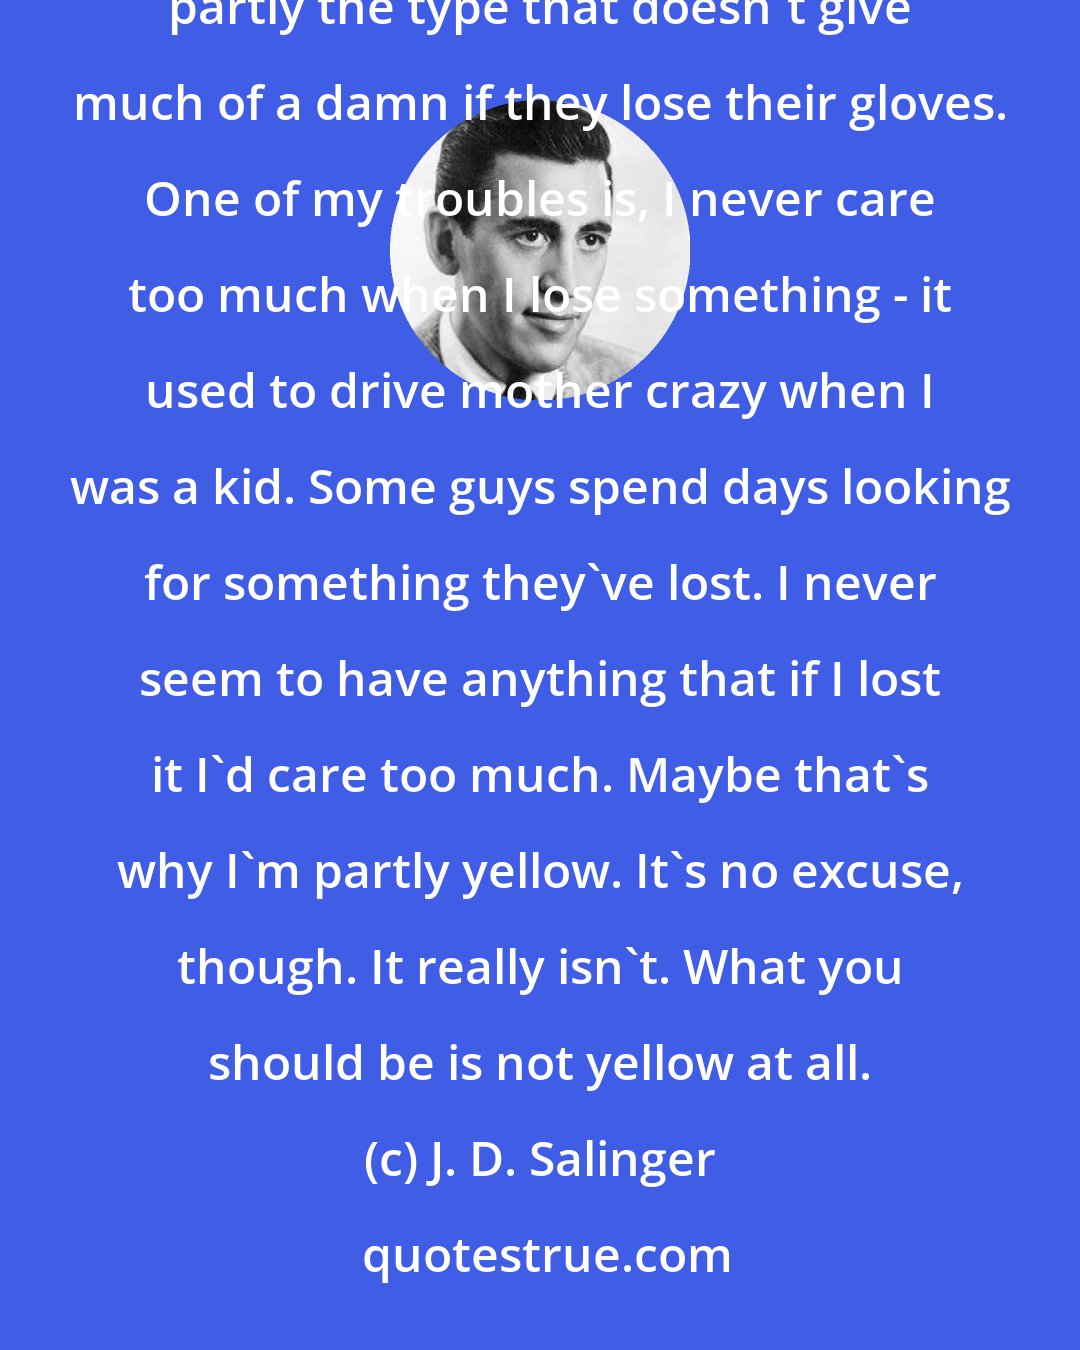 J. D. Salinger: It's no fun to be yellow. Maybe I'm not all yellow. I don't know. I think maybe I'm just partly yellow and partly the type that doesn't give much of a damn if they lose their gloves. One of my troubles is, I never care too much when I lose something - it used to drive mother crazy when I was a kid. Some guys spend days looking for something they've lost. I never seem to have anything that if I lost it I'd care too much. Maybe that's why I'm partly yellow. It's no excuse, though. It really isn't. What you should be is not yellow at all.